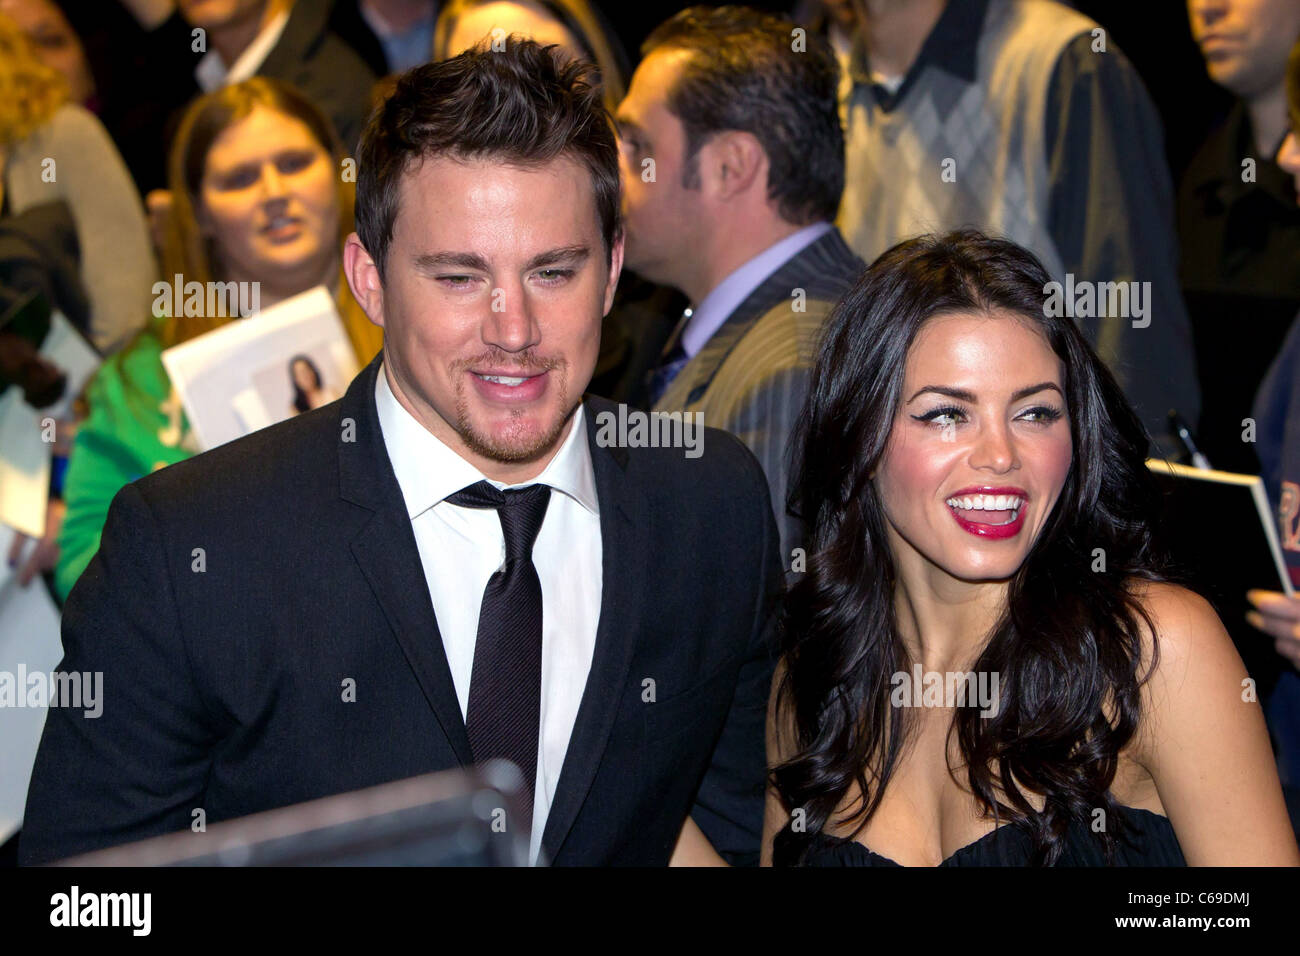 Channing Tatum, Jenna Dewan at arrivals for THE DILEMMA Premiere, AMC River East Theater, Chicago, IL January 6, 2011. Photo By: Jason Smith/Everett Collection Stock Photo